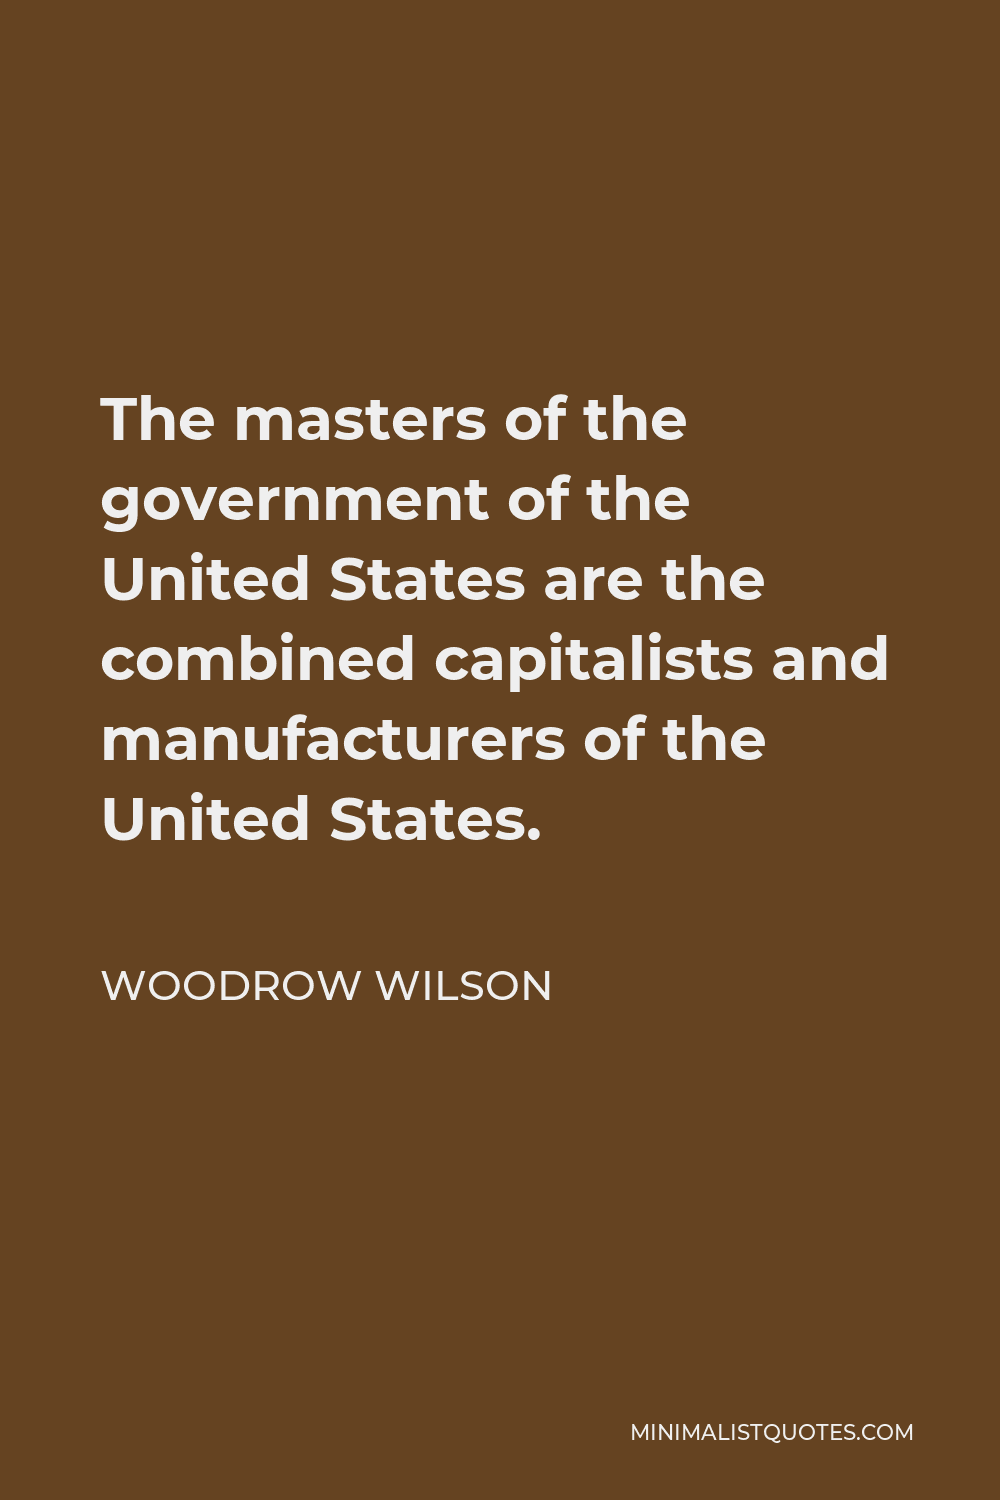 Woodrow Wilson Quote - The masters of the government of the United States are the combined capitalists and manufacturers of the United States.